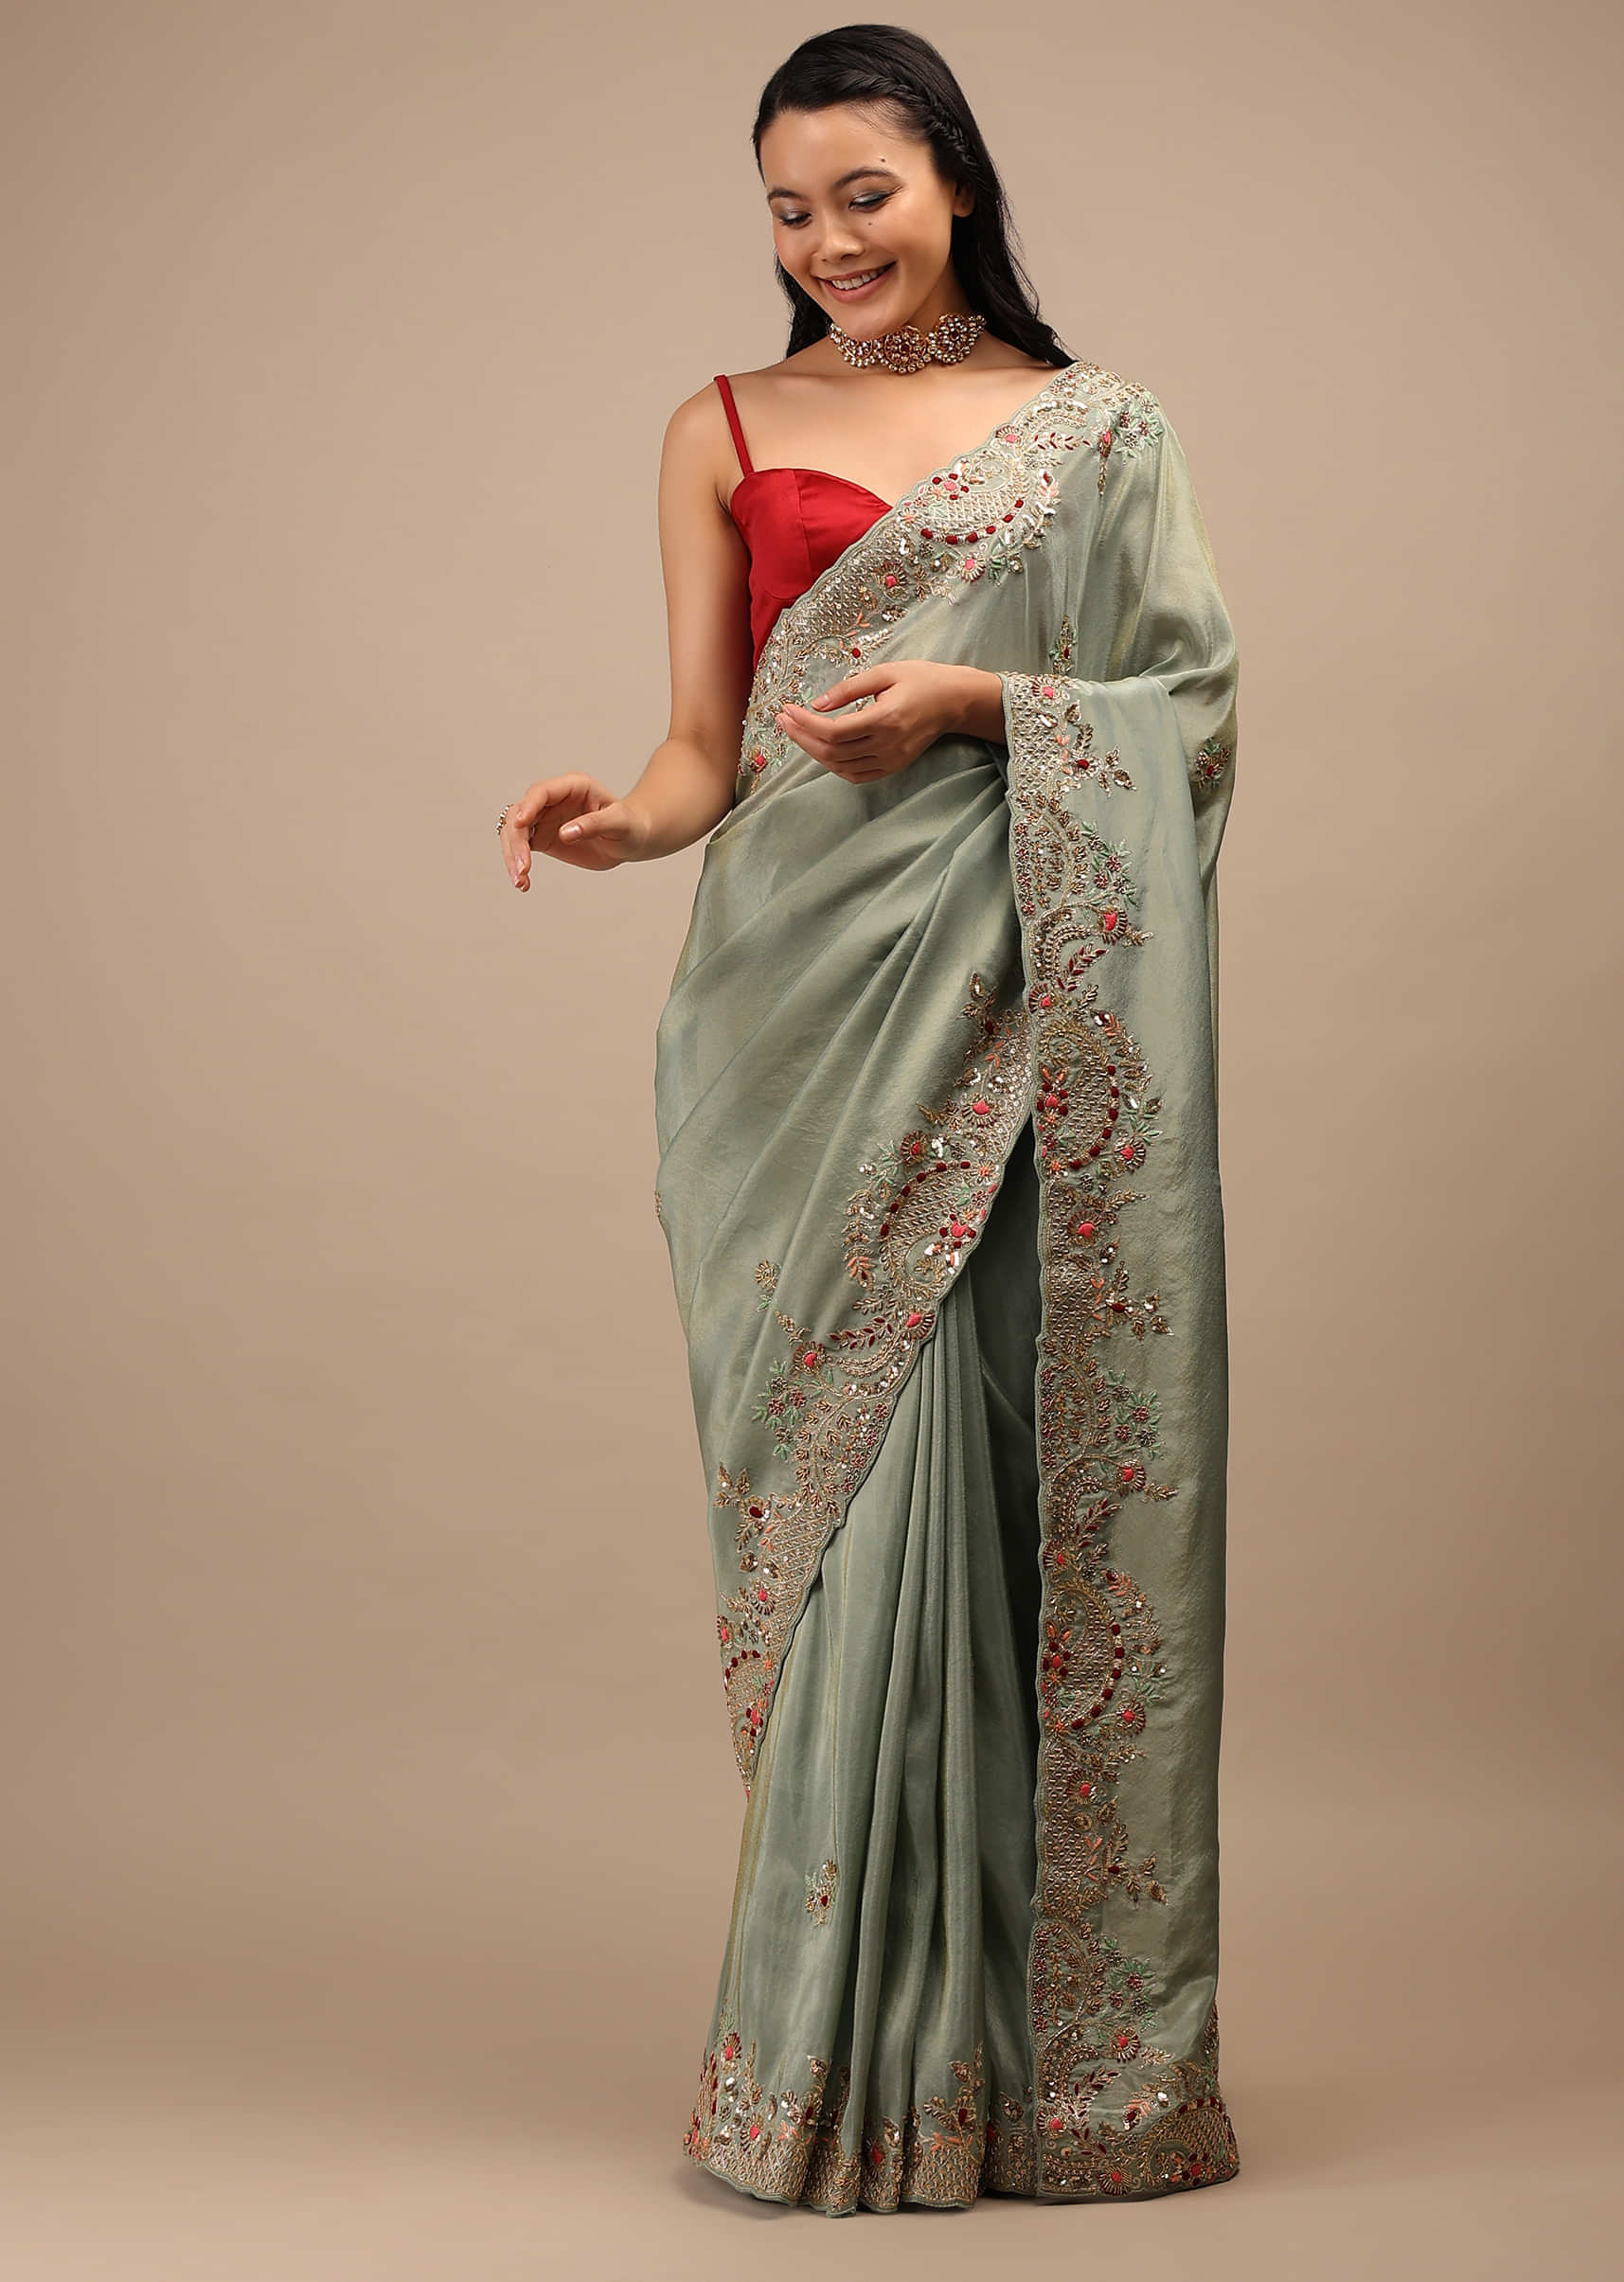 Iceberg Shimmer Saree In Cut Dana And Resham Embroidery Buttis, Cutwork Embroidery Border In Multi Color Resham And Beads